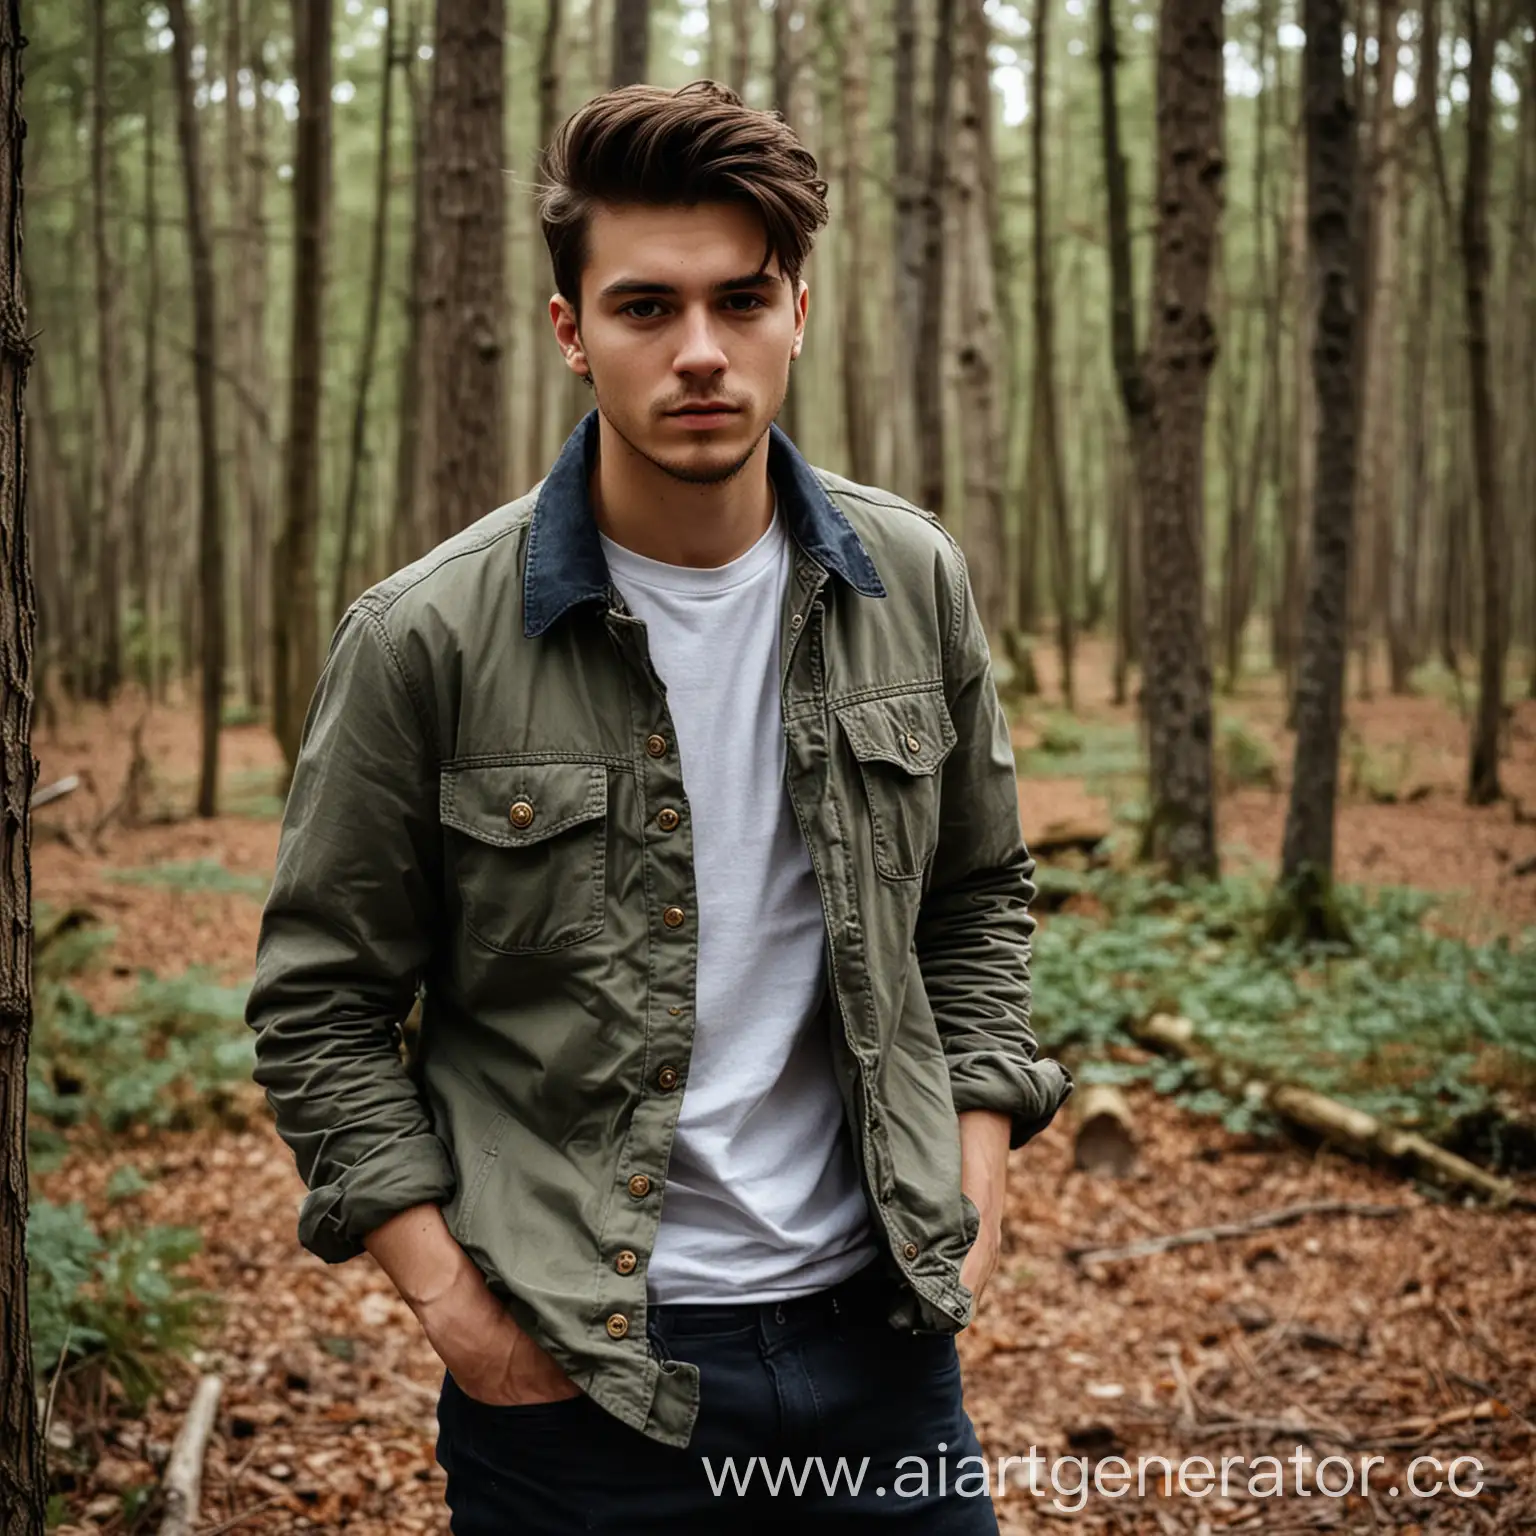 Young-Man-Enjoying-Nature-Photography-in-Casual-Attire